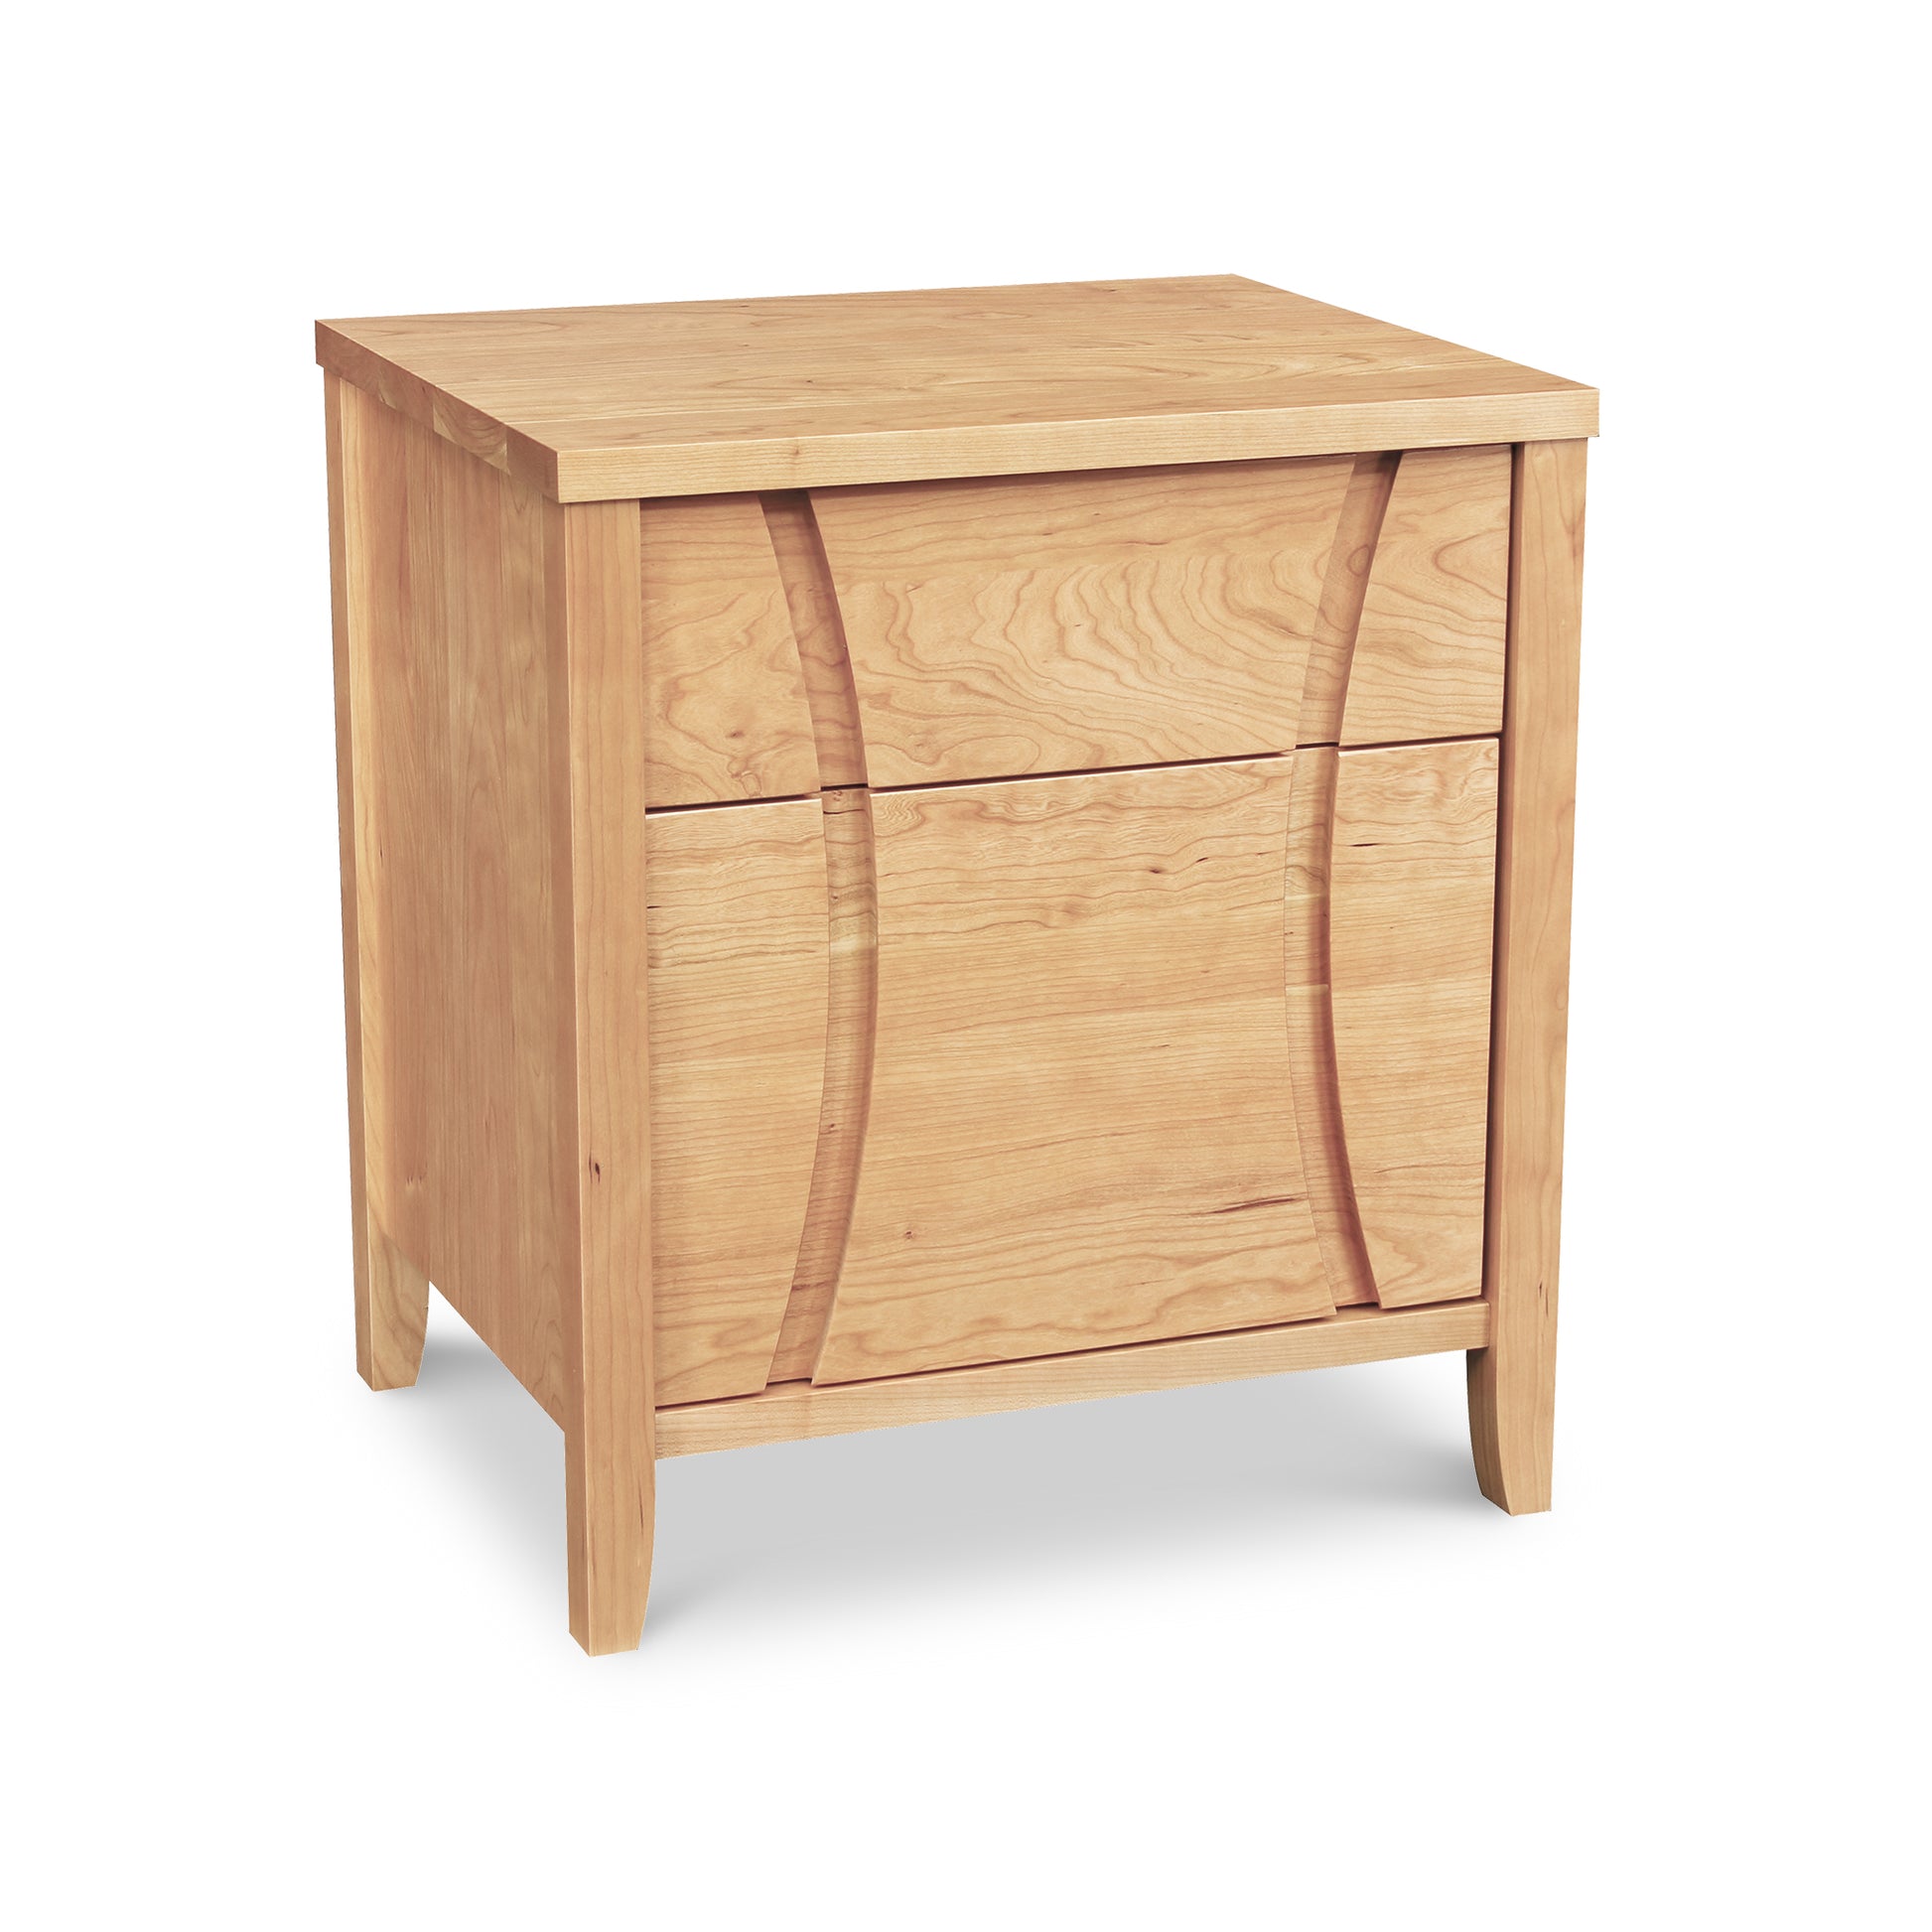 A Holland 1-Drawer Nightstand with Door by Lyndon Furniture, intricately designed.